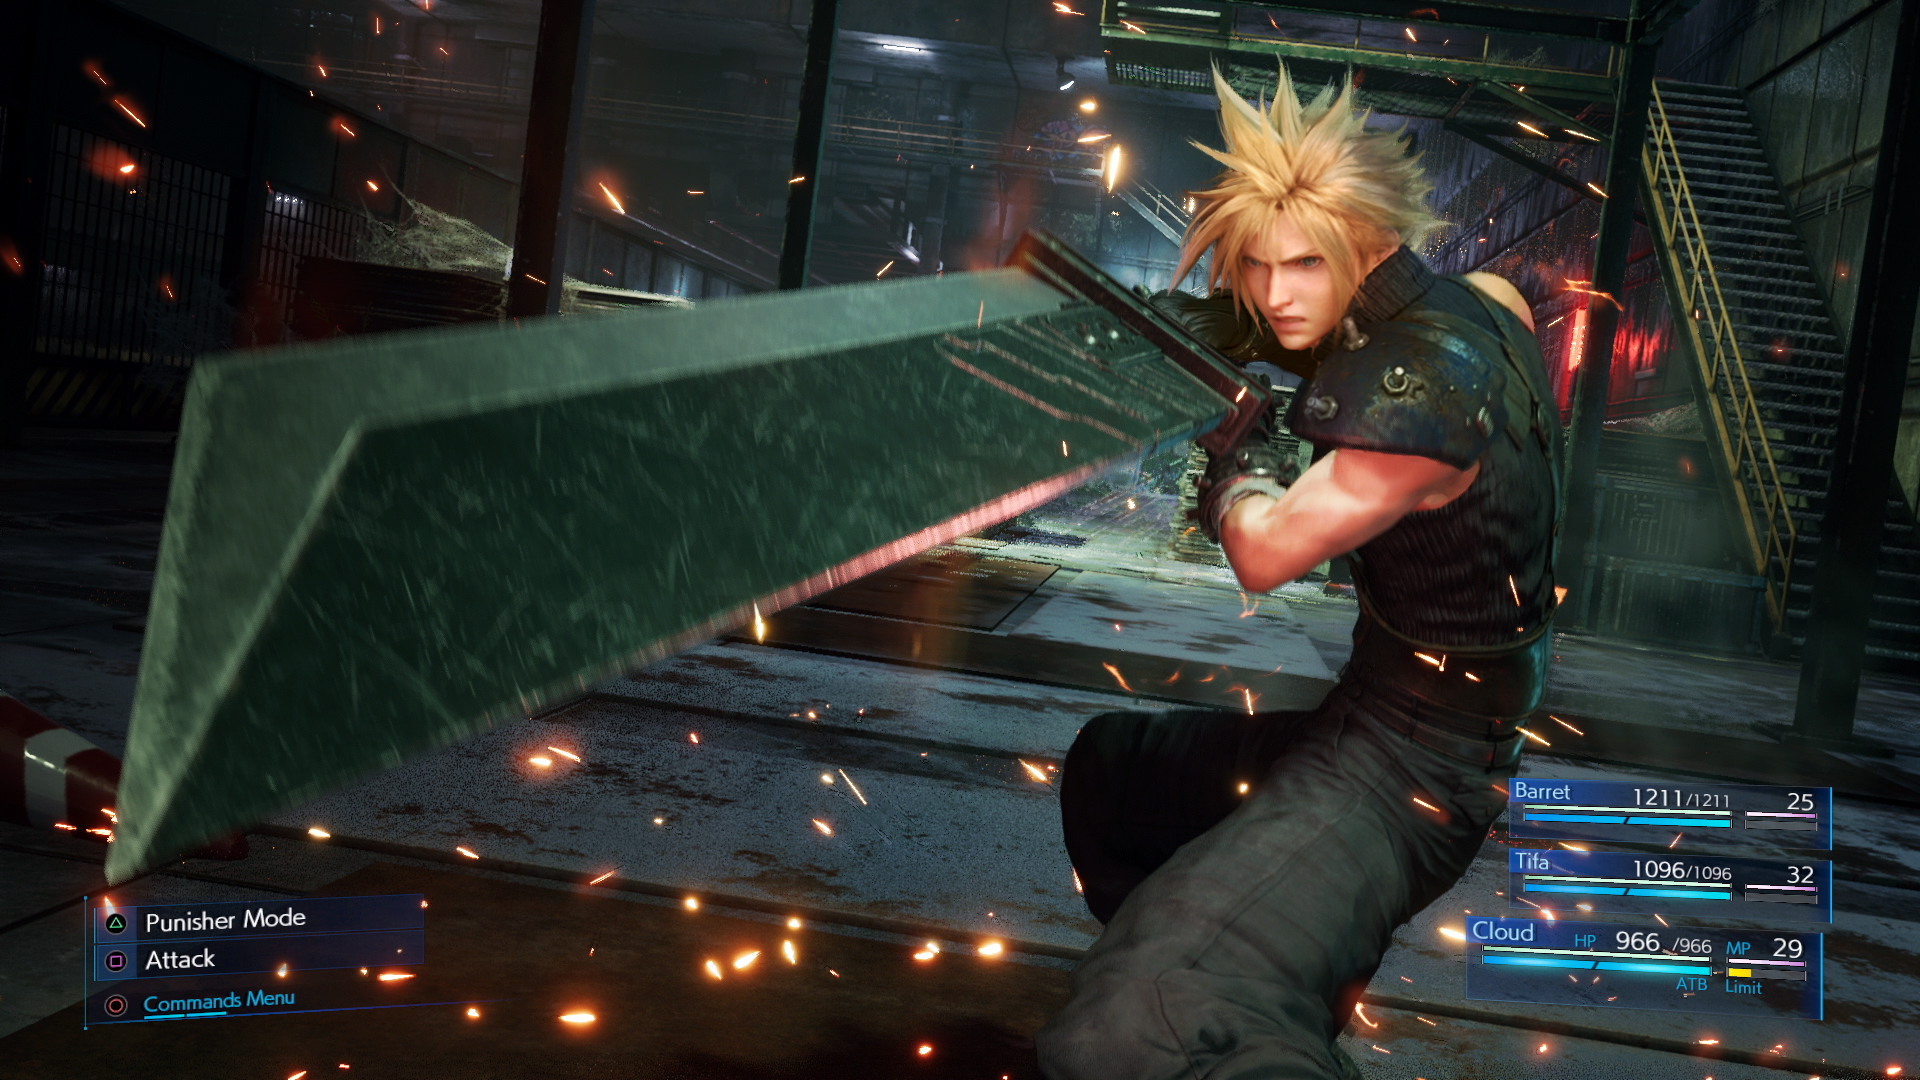 Confirmed No Denuvo for FFVII Remake PC! Potential mods coming